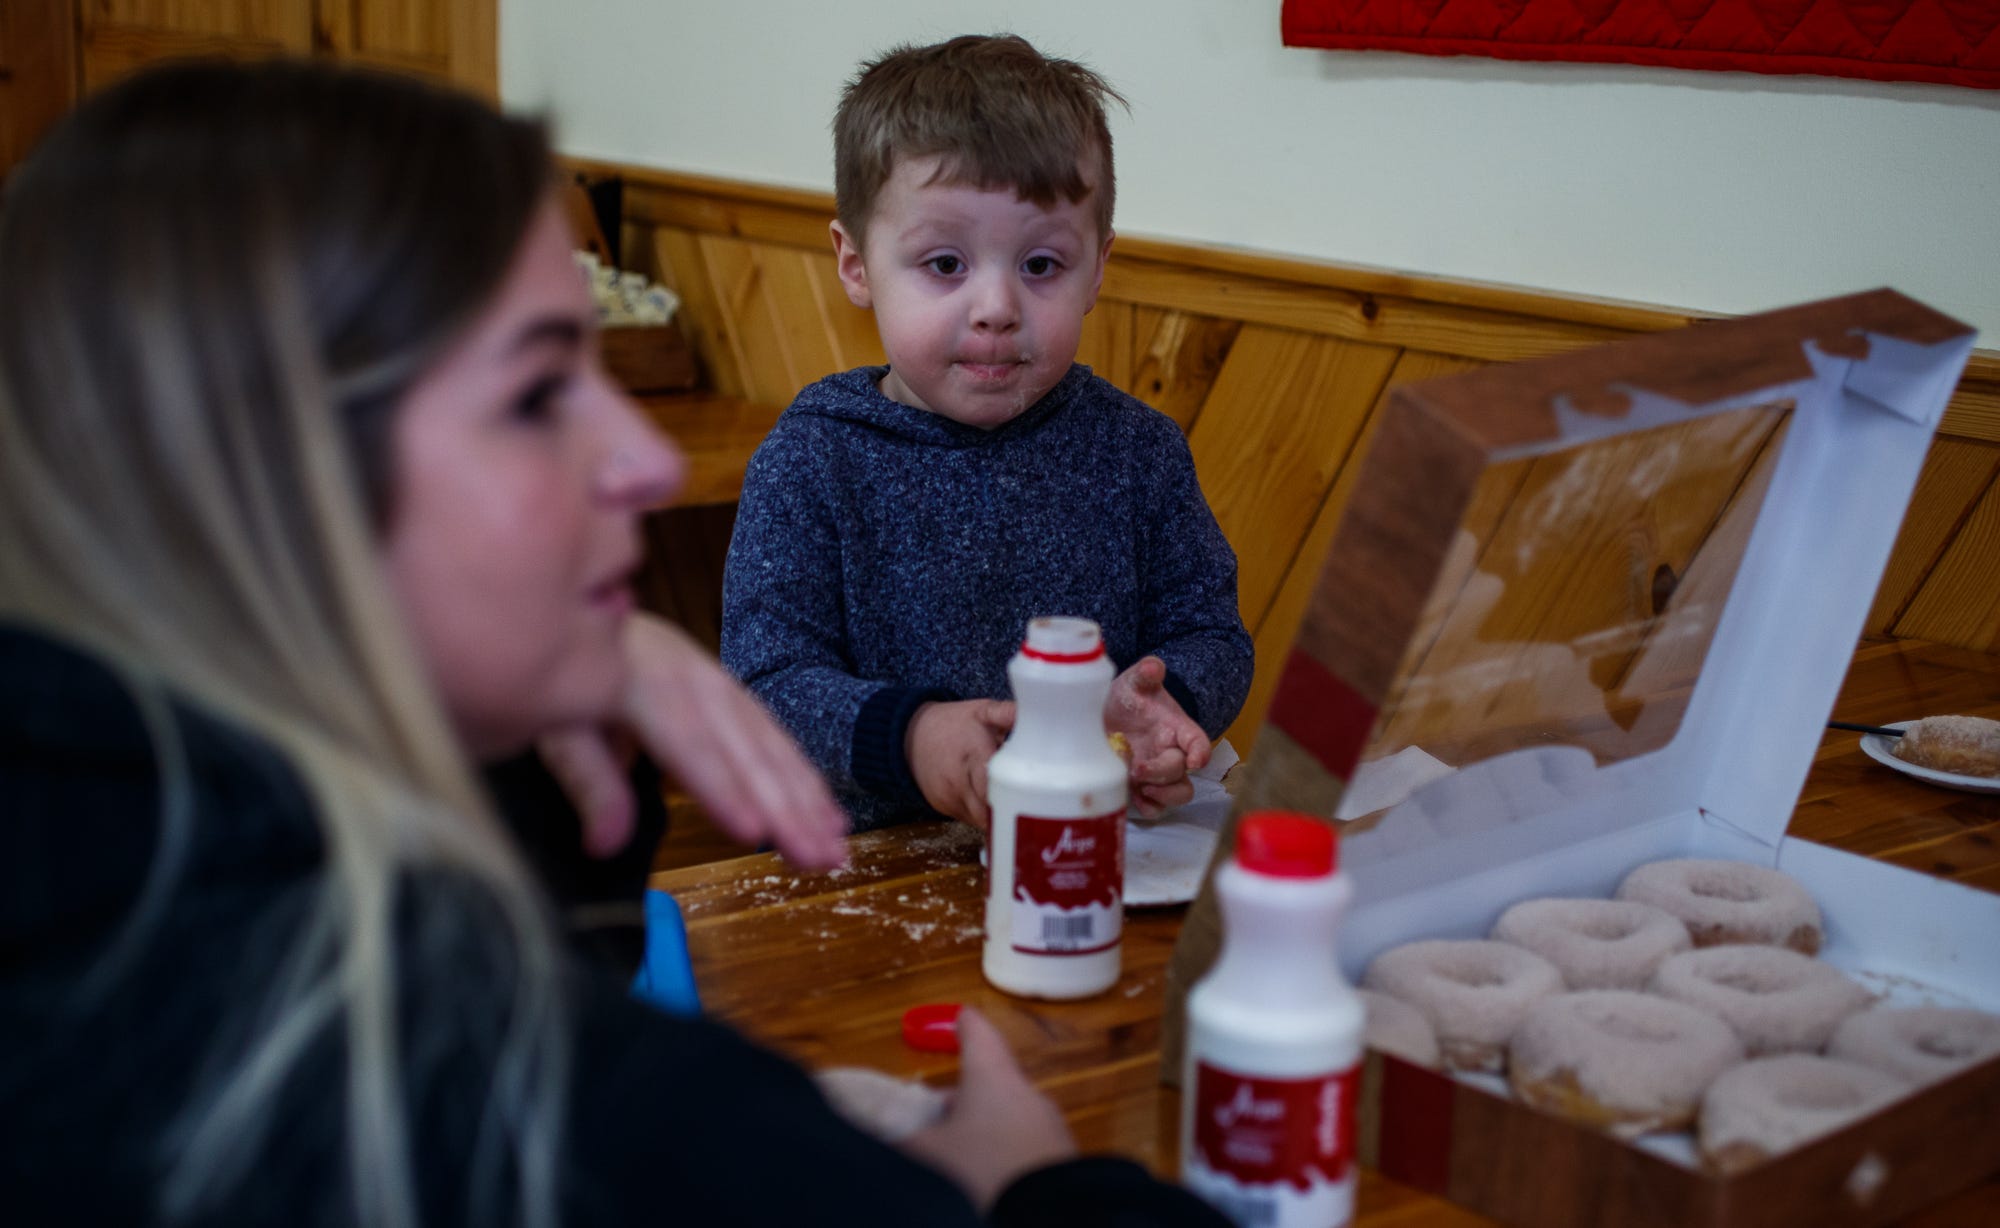 Harvey, 3, eats a donut at Rise'n Roll Bakery in Middlebury, Indiana, alongside his mother, Abey Bonifield, after dropping off his older brother, Connor, 13, at school. "I wanted our time to be more quality time than me just being there, zombified on the couch," she said. "Some days you're falling asleep before it's bedtime for them. It's just exhausting, you feel kind of delirious all the time, like your day is never quite right."